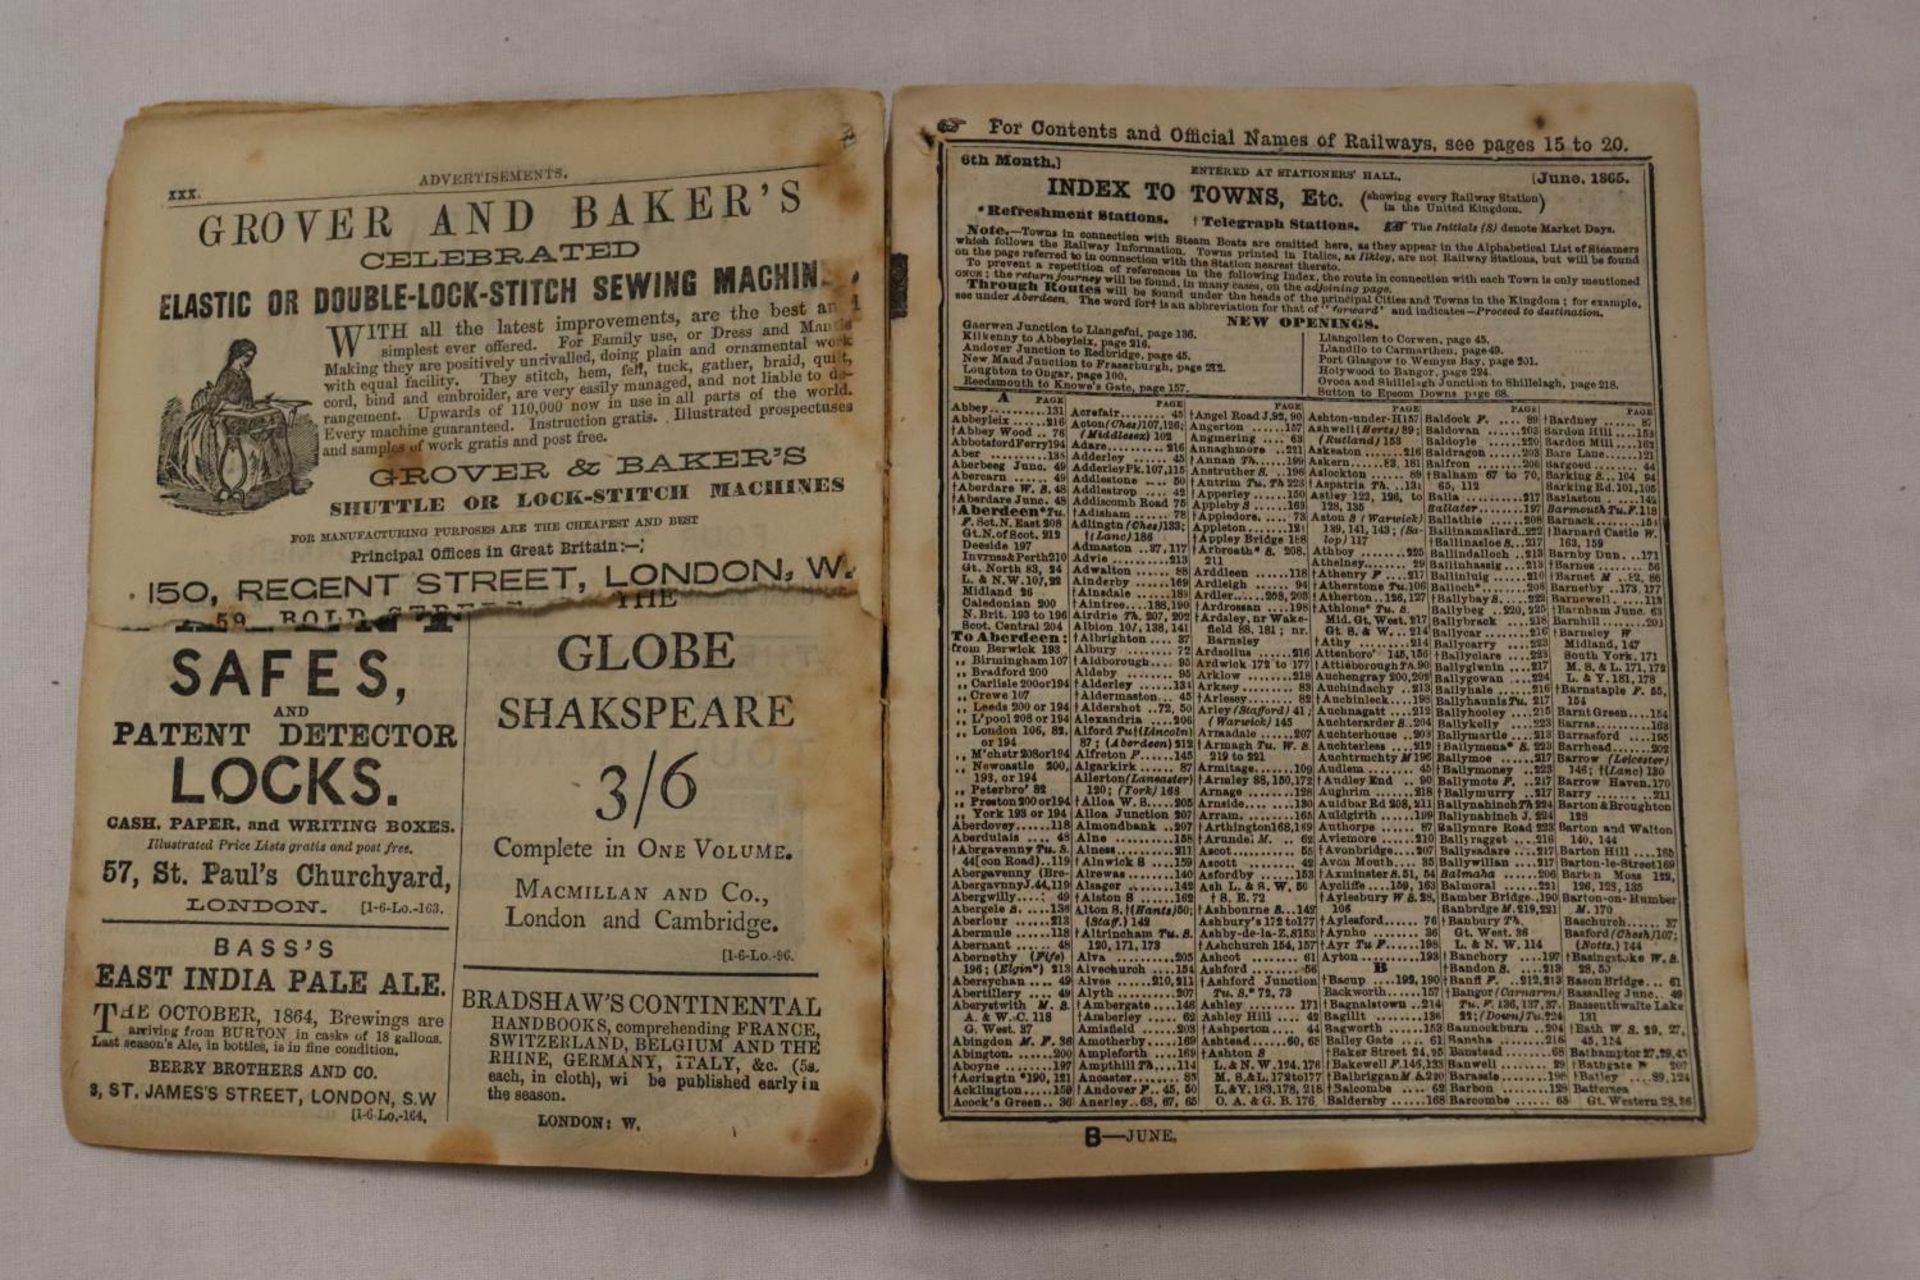 A BRADSHAWS MONTHLY RAILWAY GUIDE DATED JUNE 1865 AND A FURTHER COPY APRIL 1875, PAPERBACK VERSIONS - Image 4 of 4